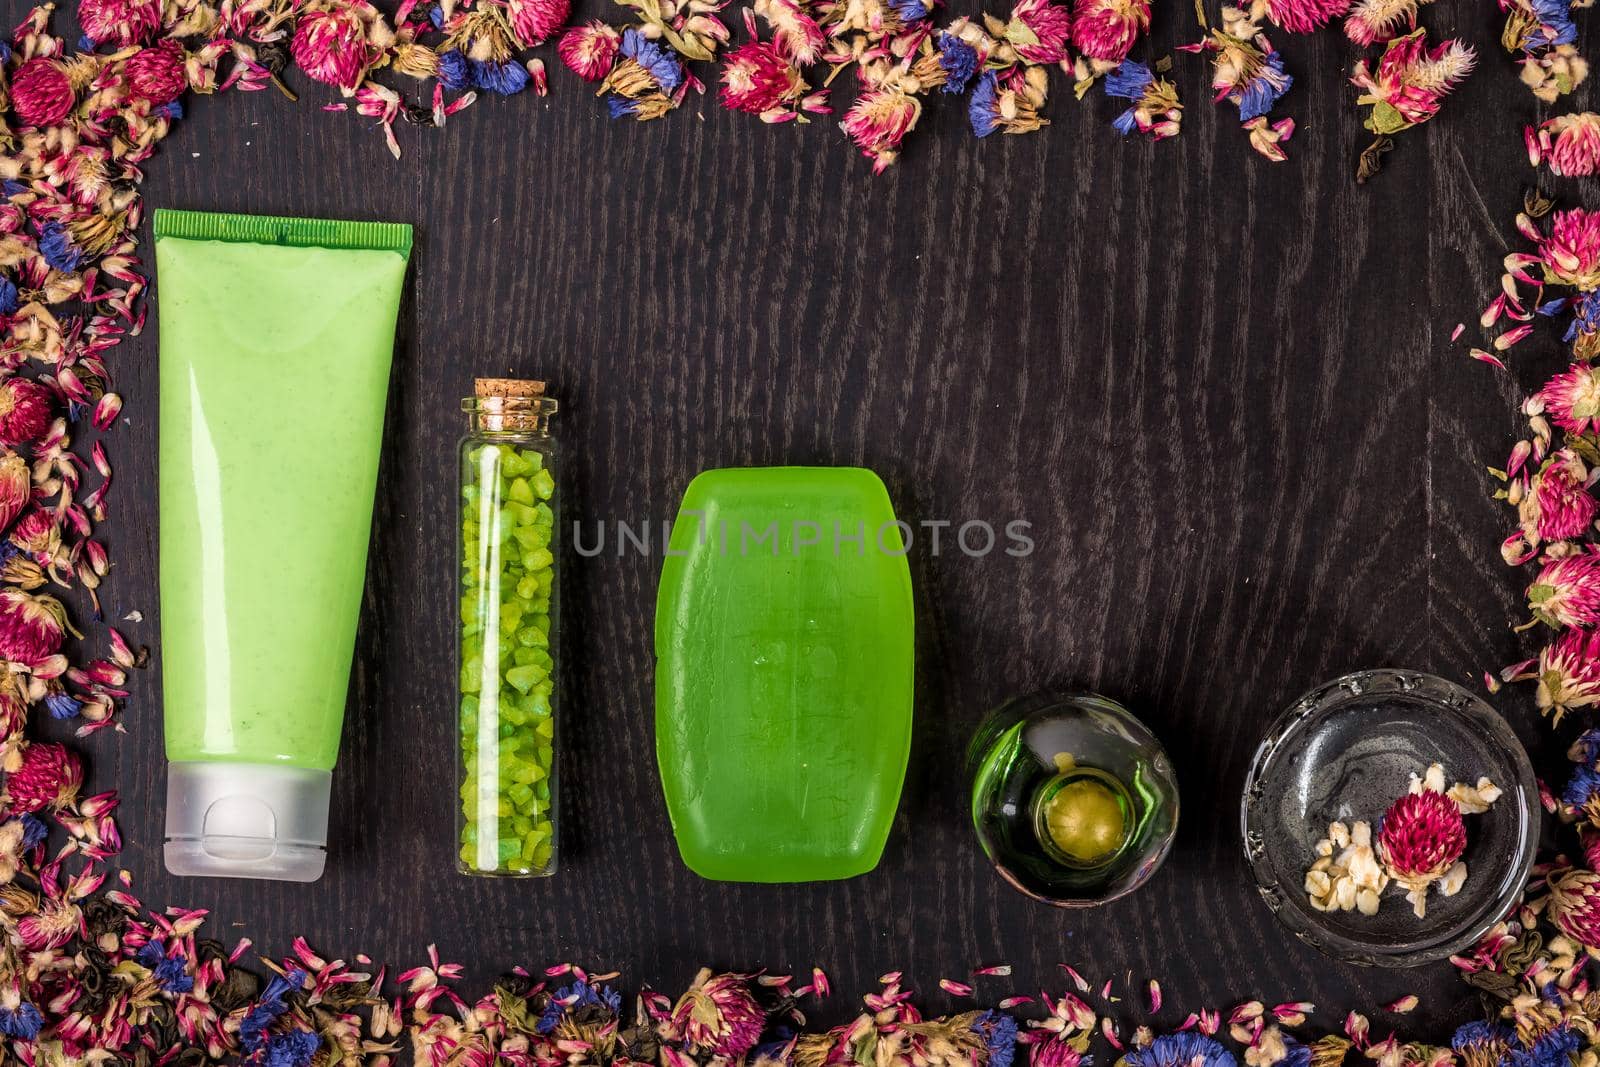 Cosmetic hygienic products with flowers on wooden background. Still life. Top view. Copy space